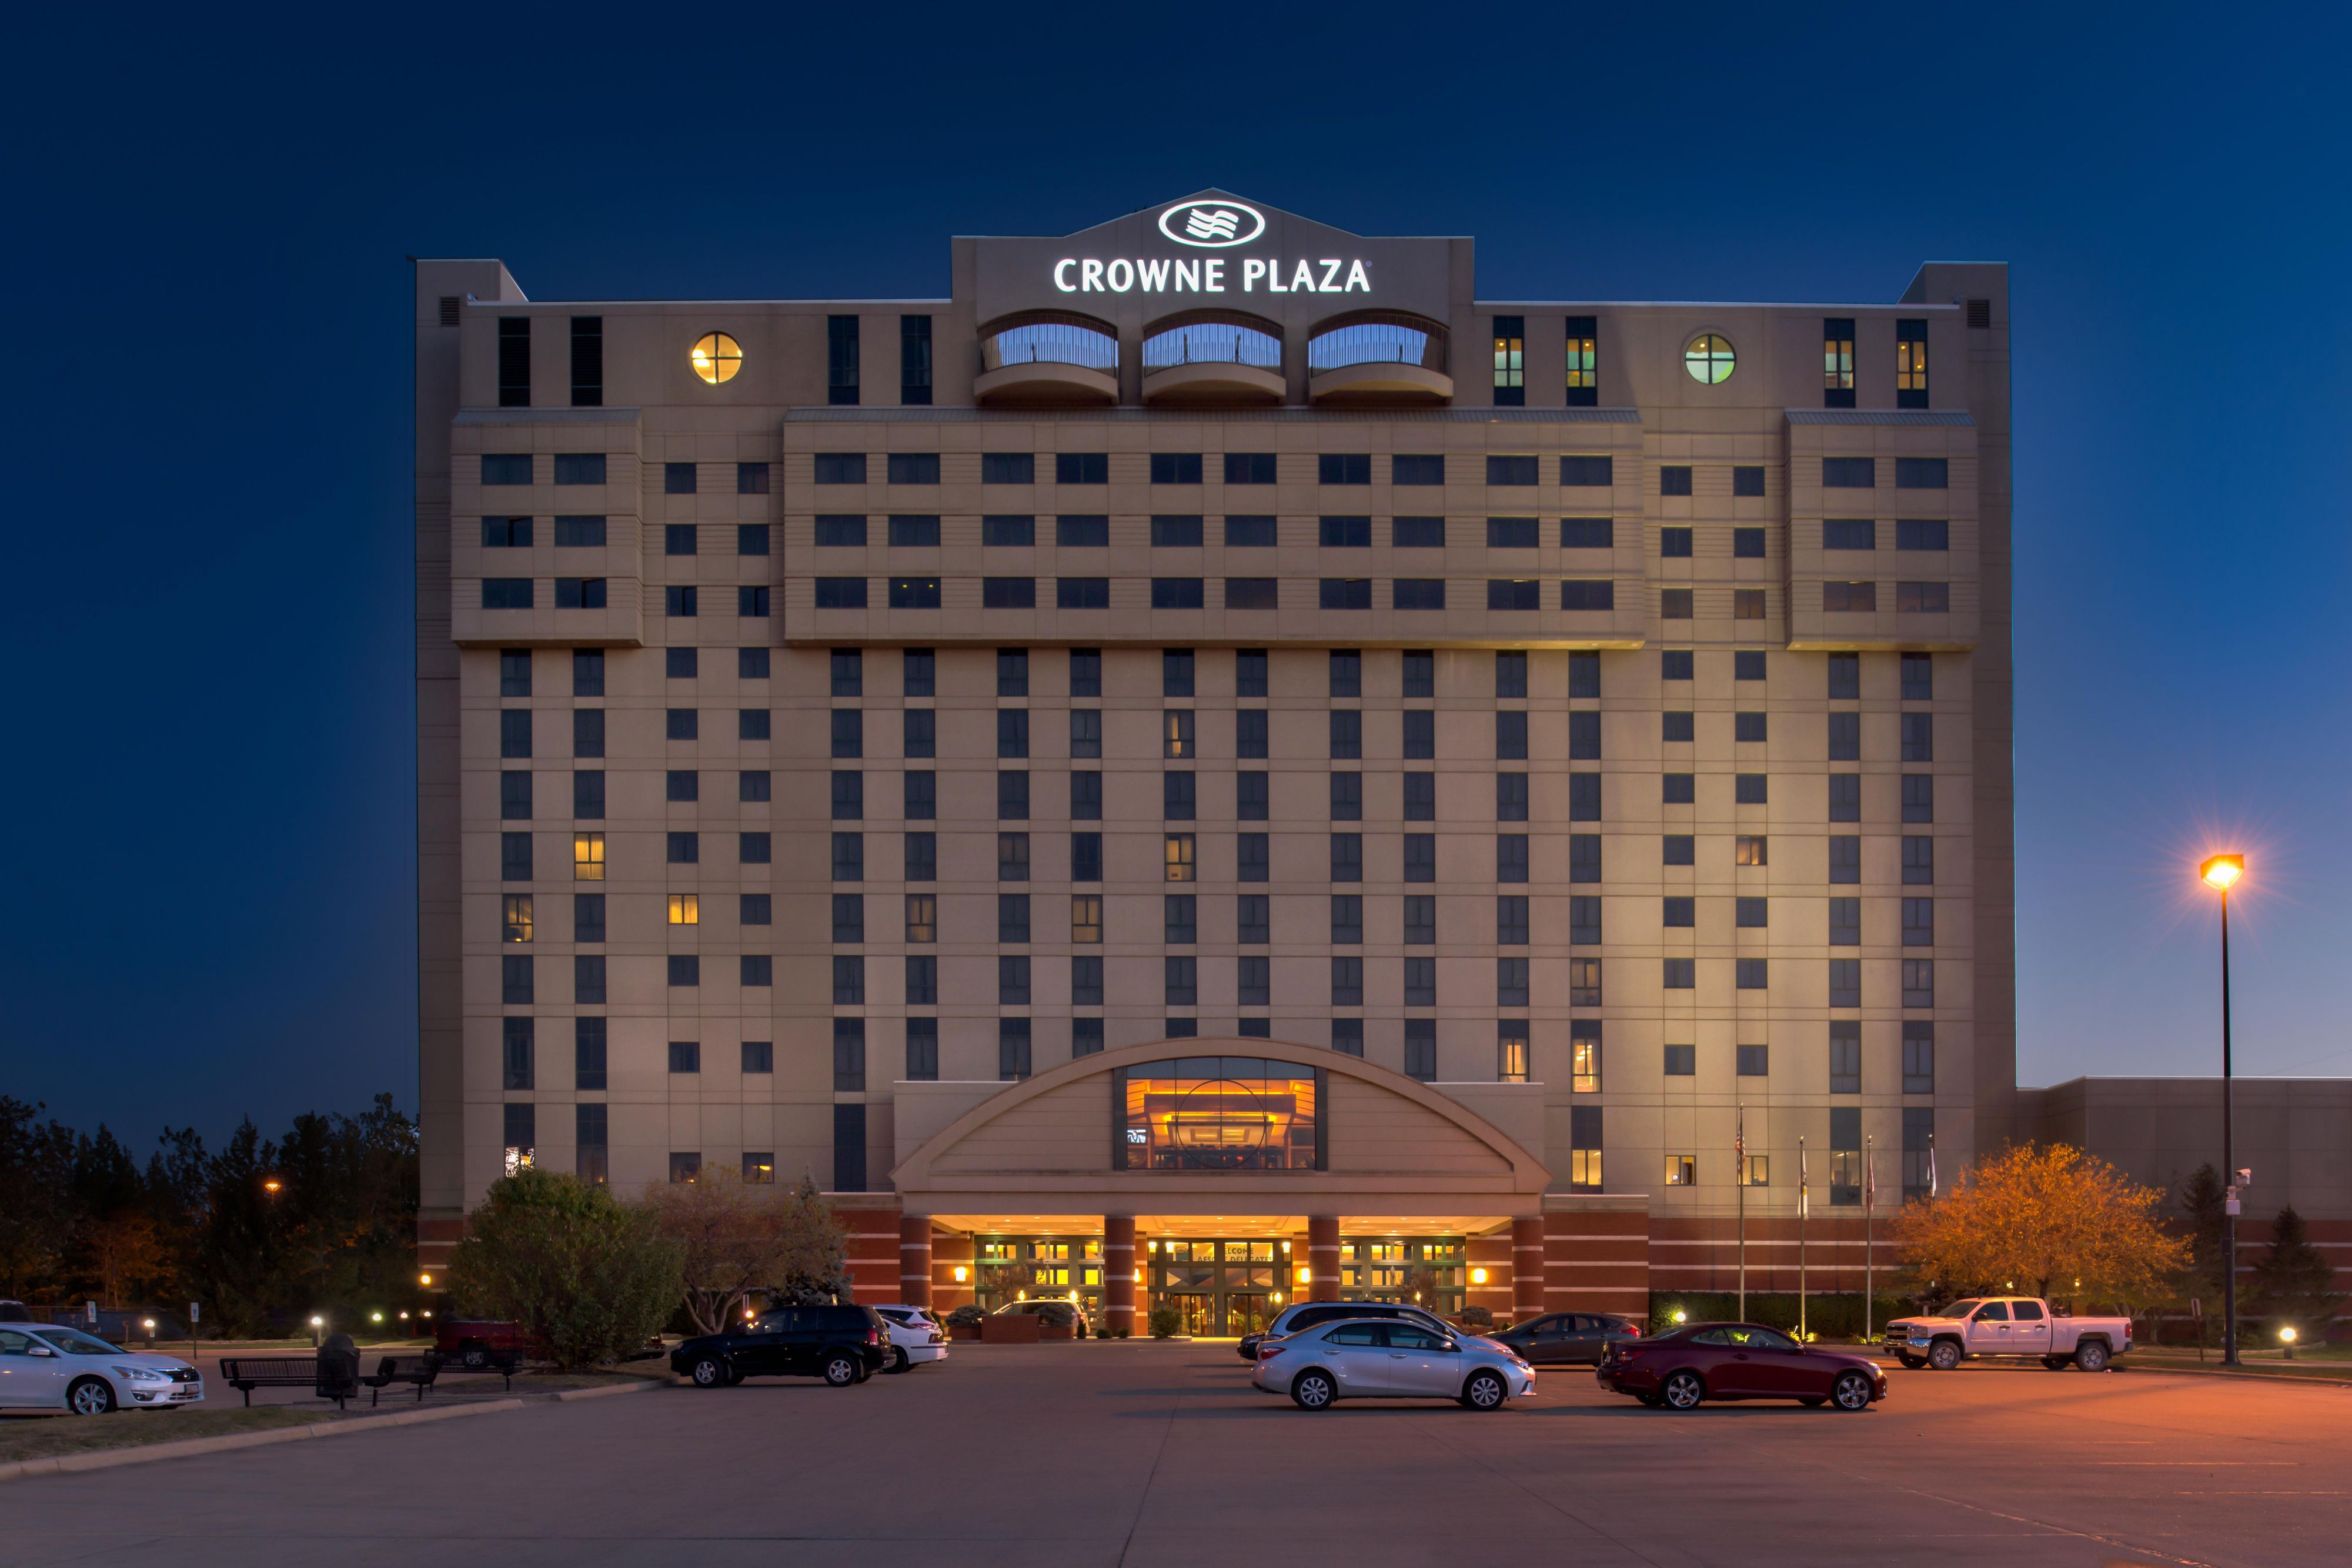 Crowne Plaza is located close to the Illinois State Fairgrounds.